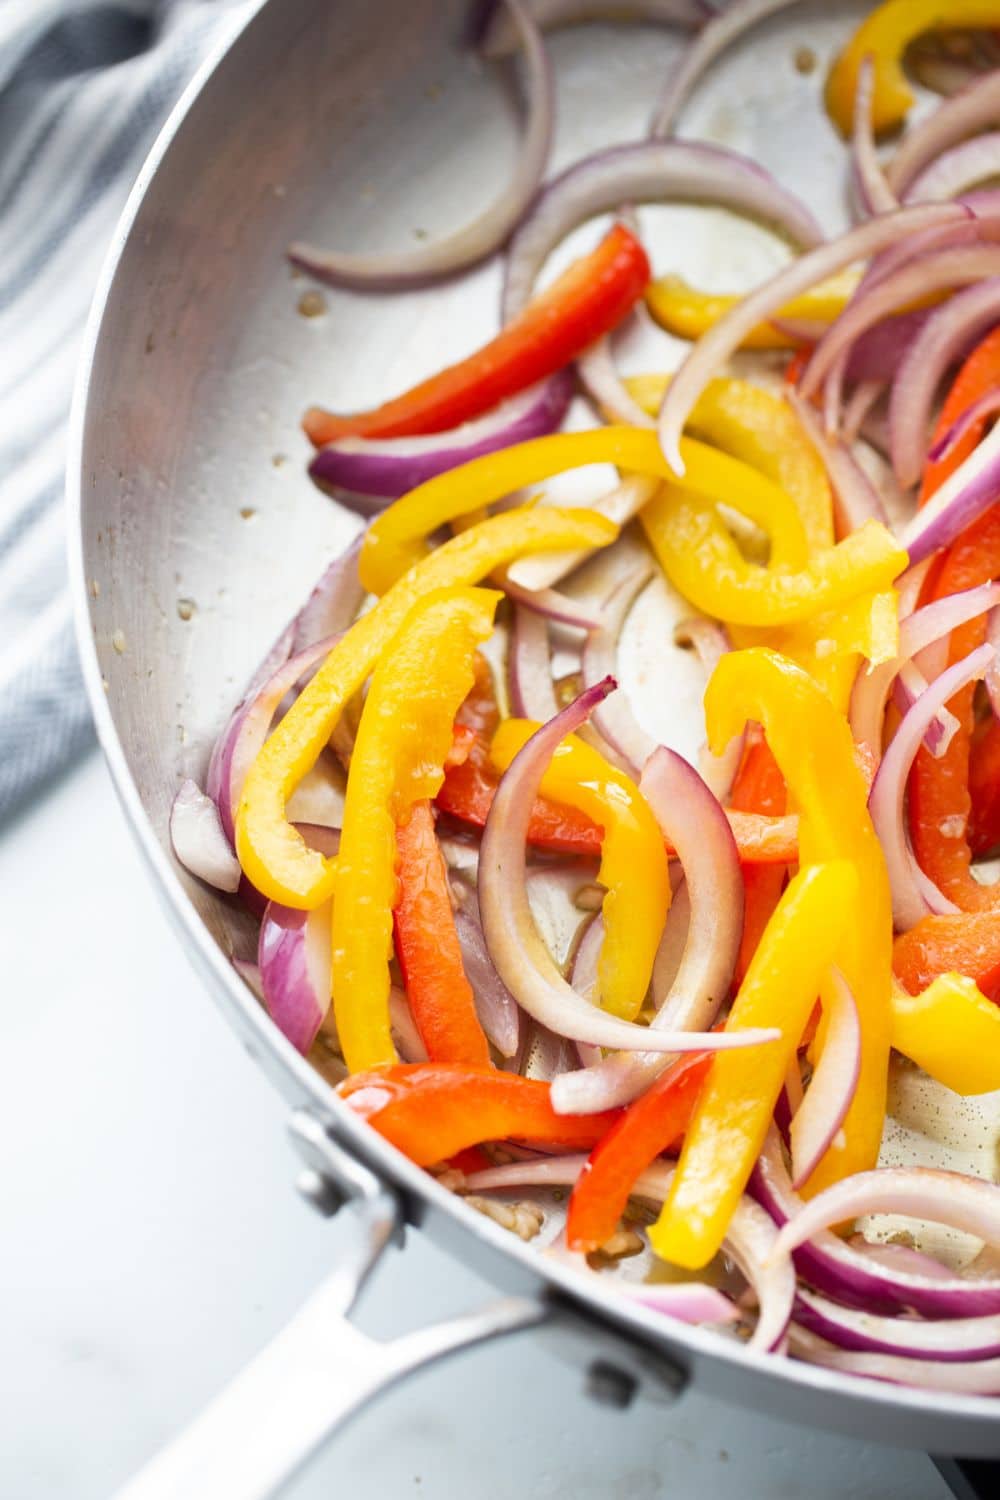 image of sliced onion and yellow and red peppers being cooked in a metal skillet